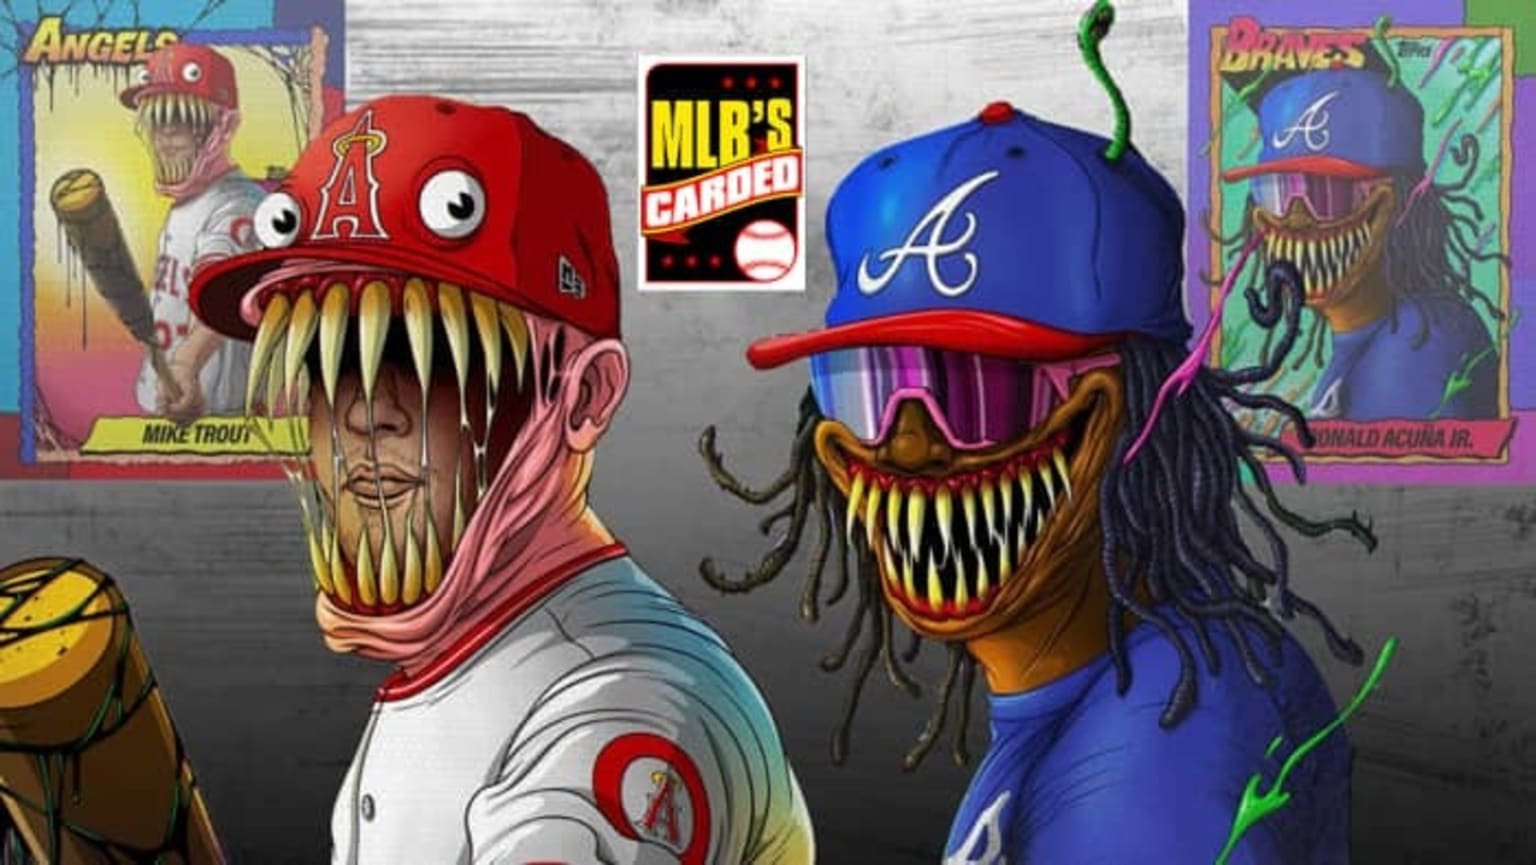 A photo illustration shows designs for two baseball cards featuring players as monsters